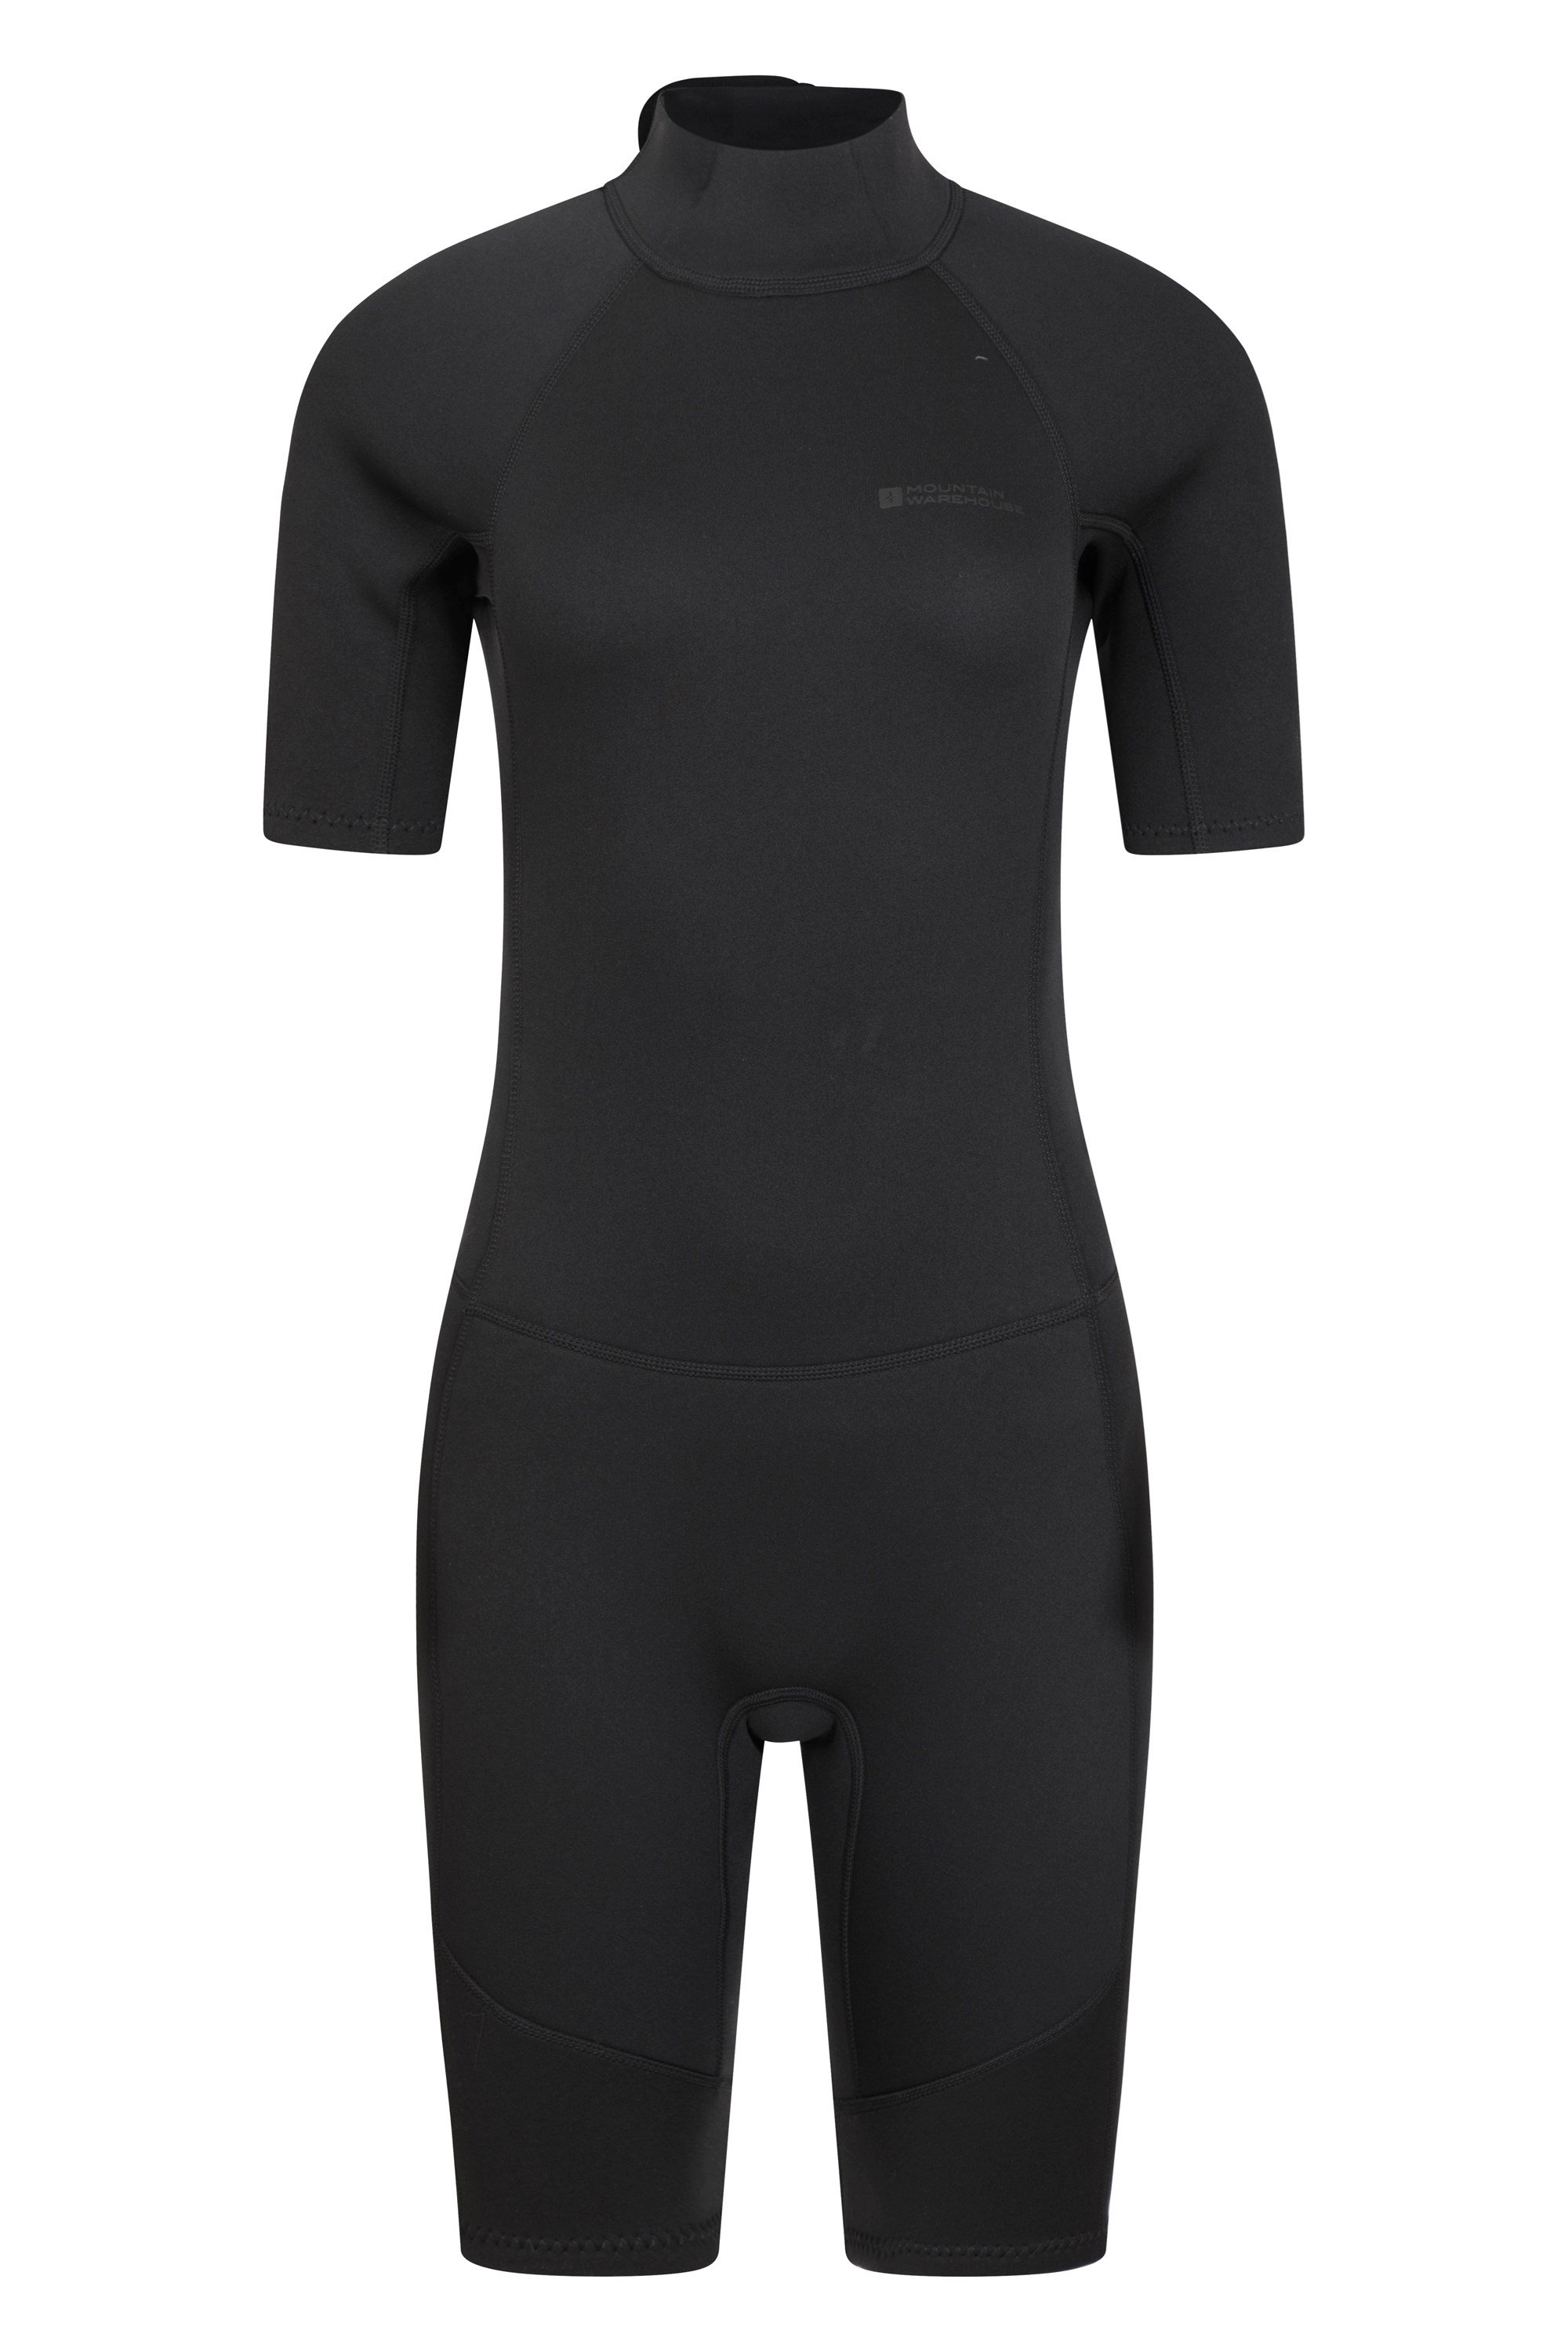 Shorty Womens 2. 5/2mm Wetsuit - Black